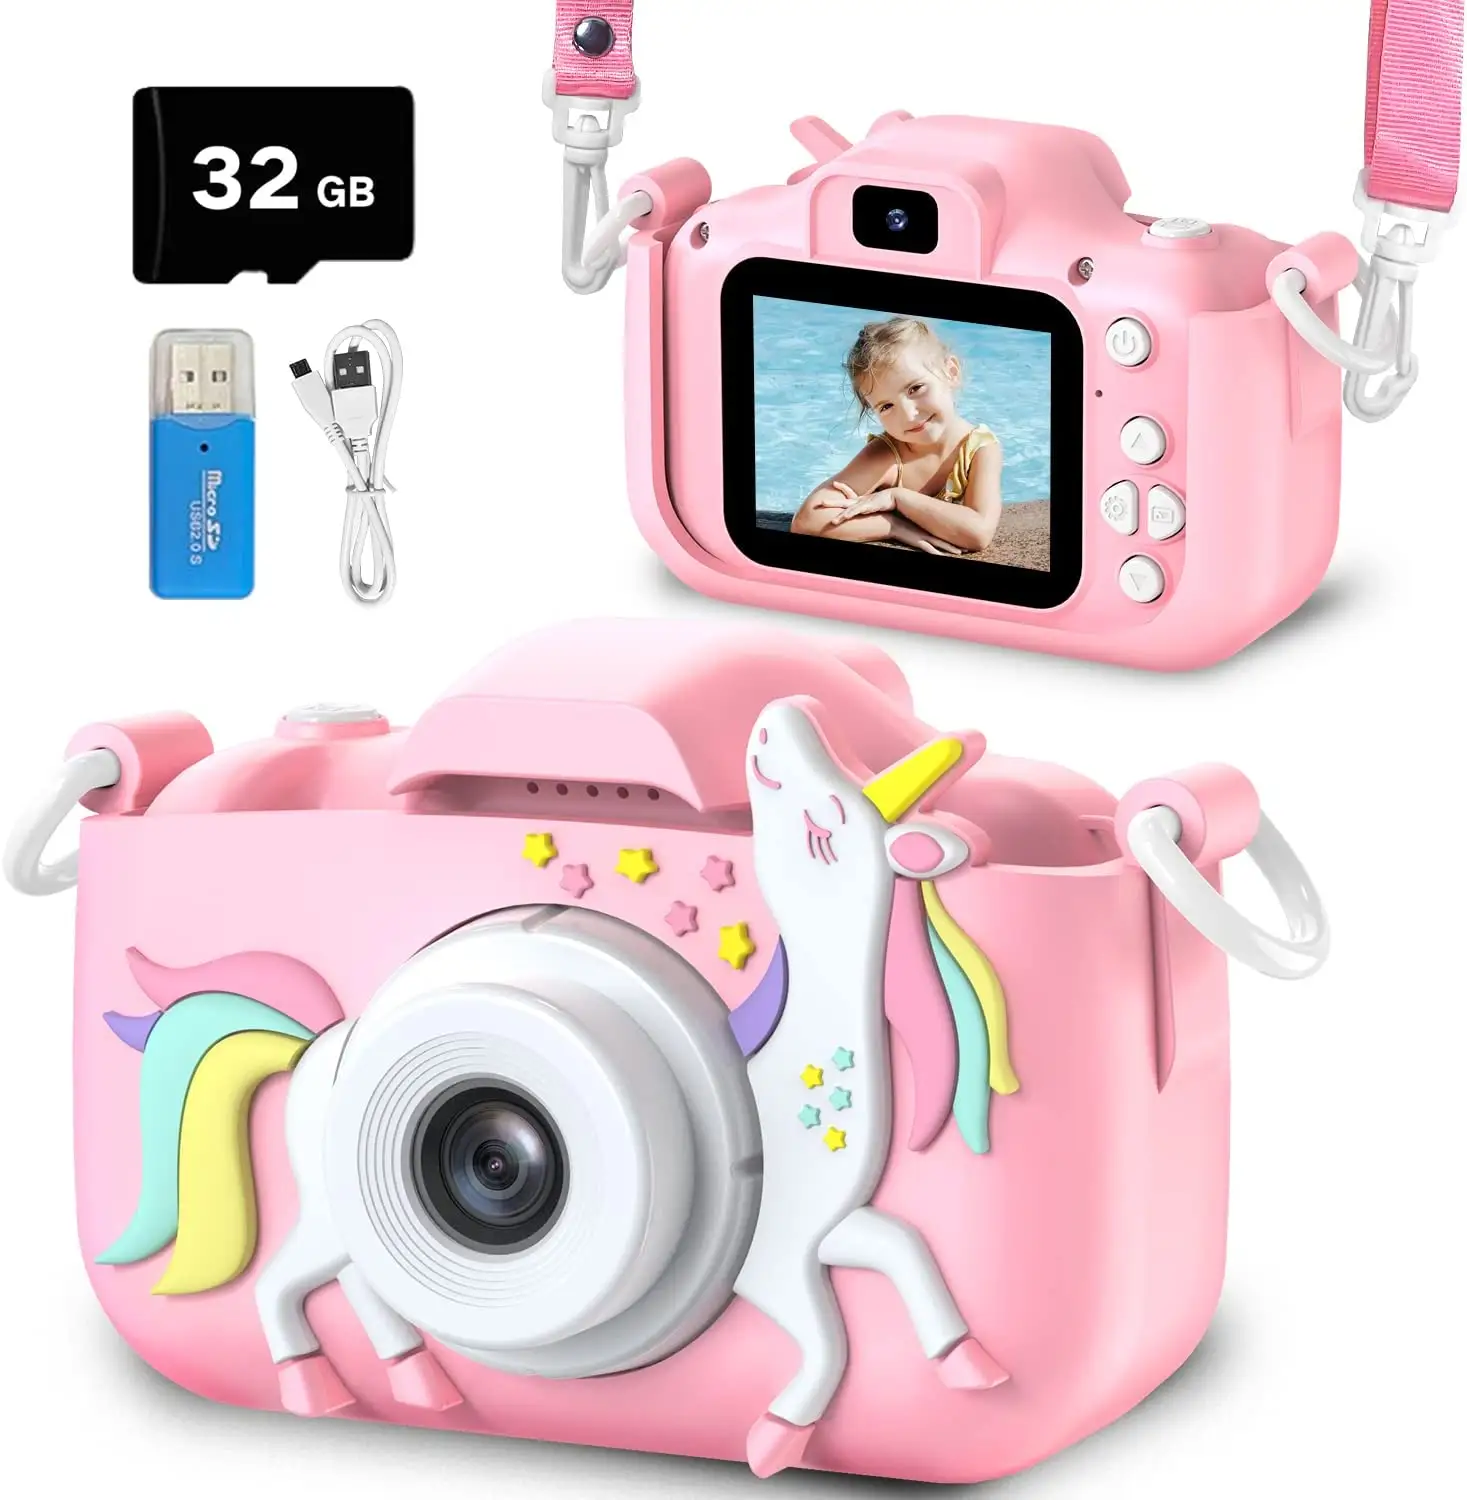 Kids Camera Toys for 3-8 Year Old Boys,Children Digital Video Camcorder Camera with Cartoon Soft Silicone Cover, Best Christmas